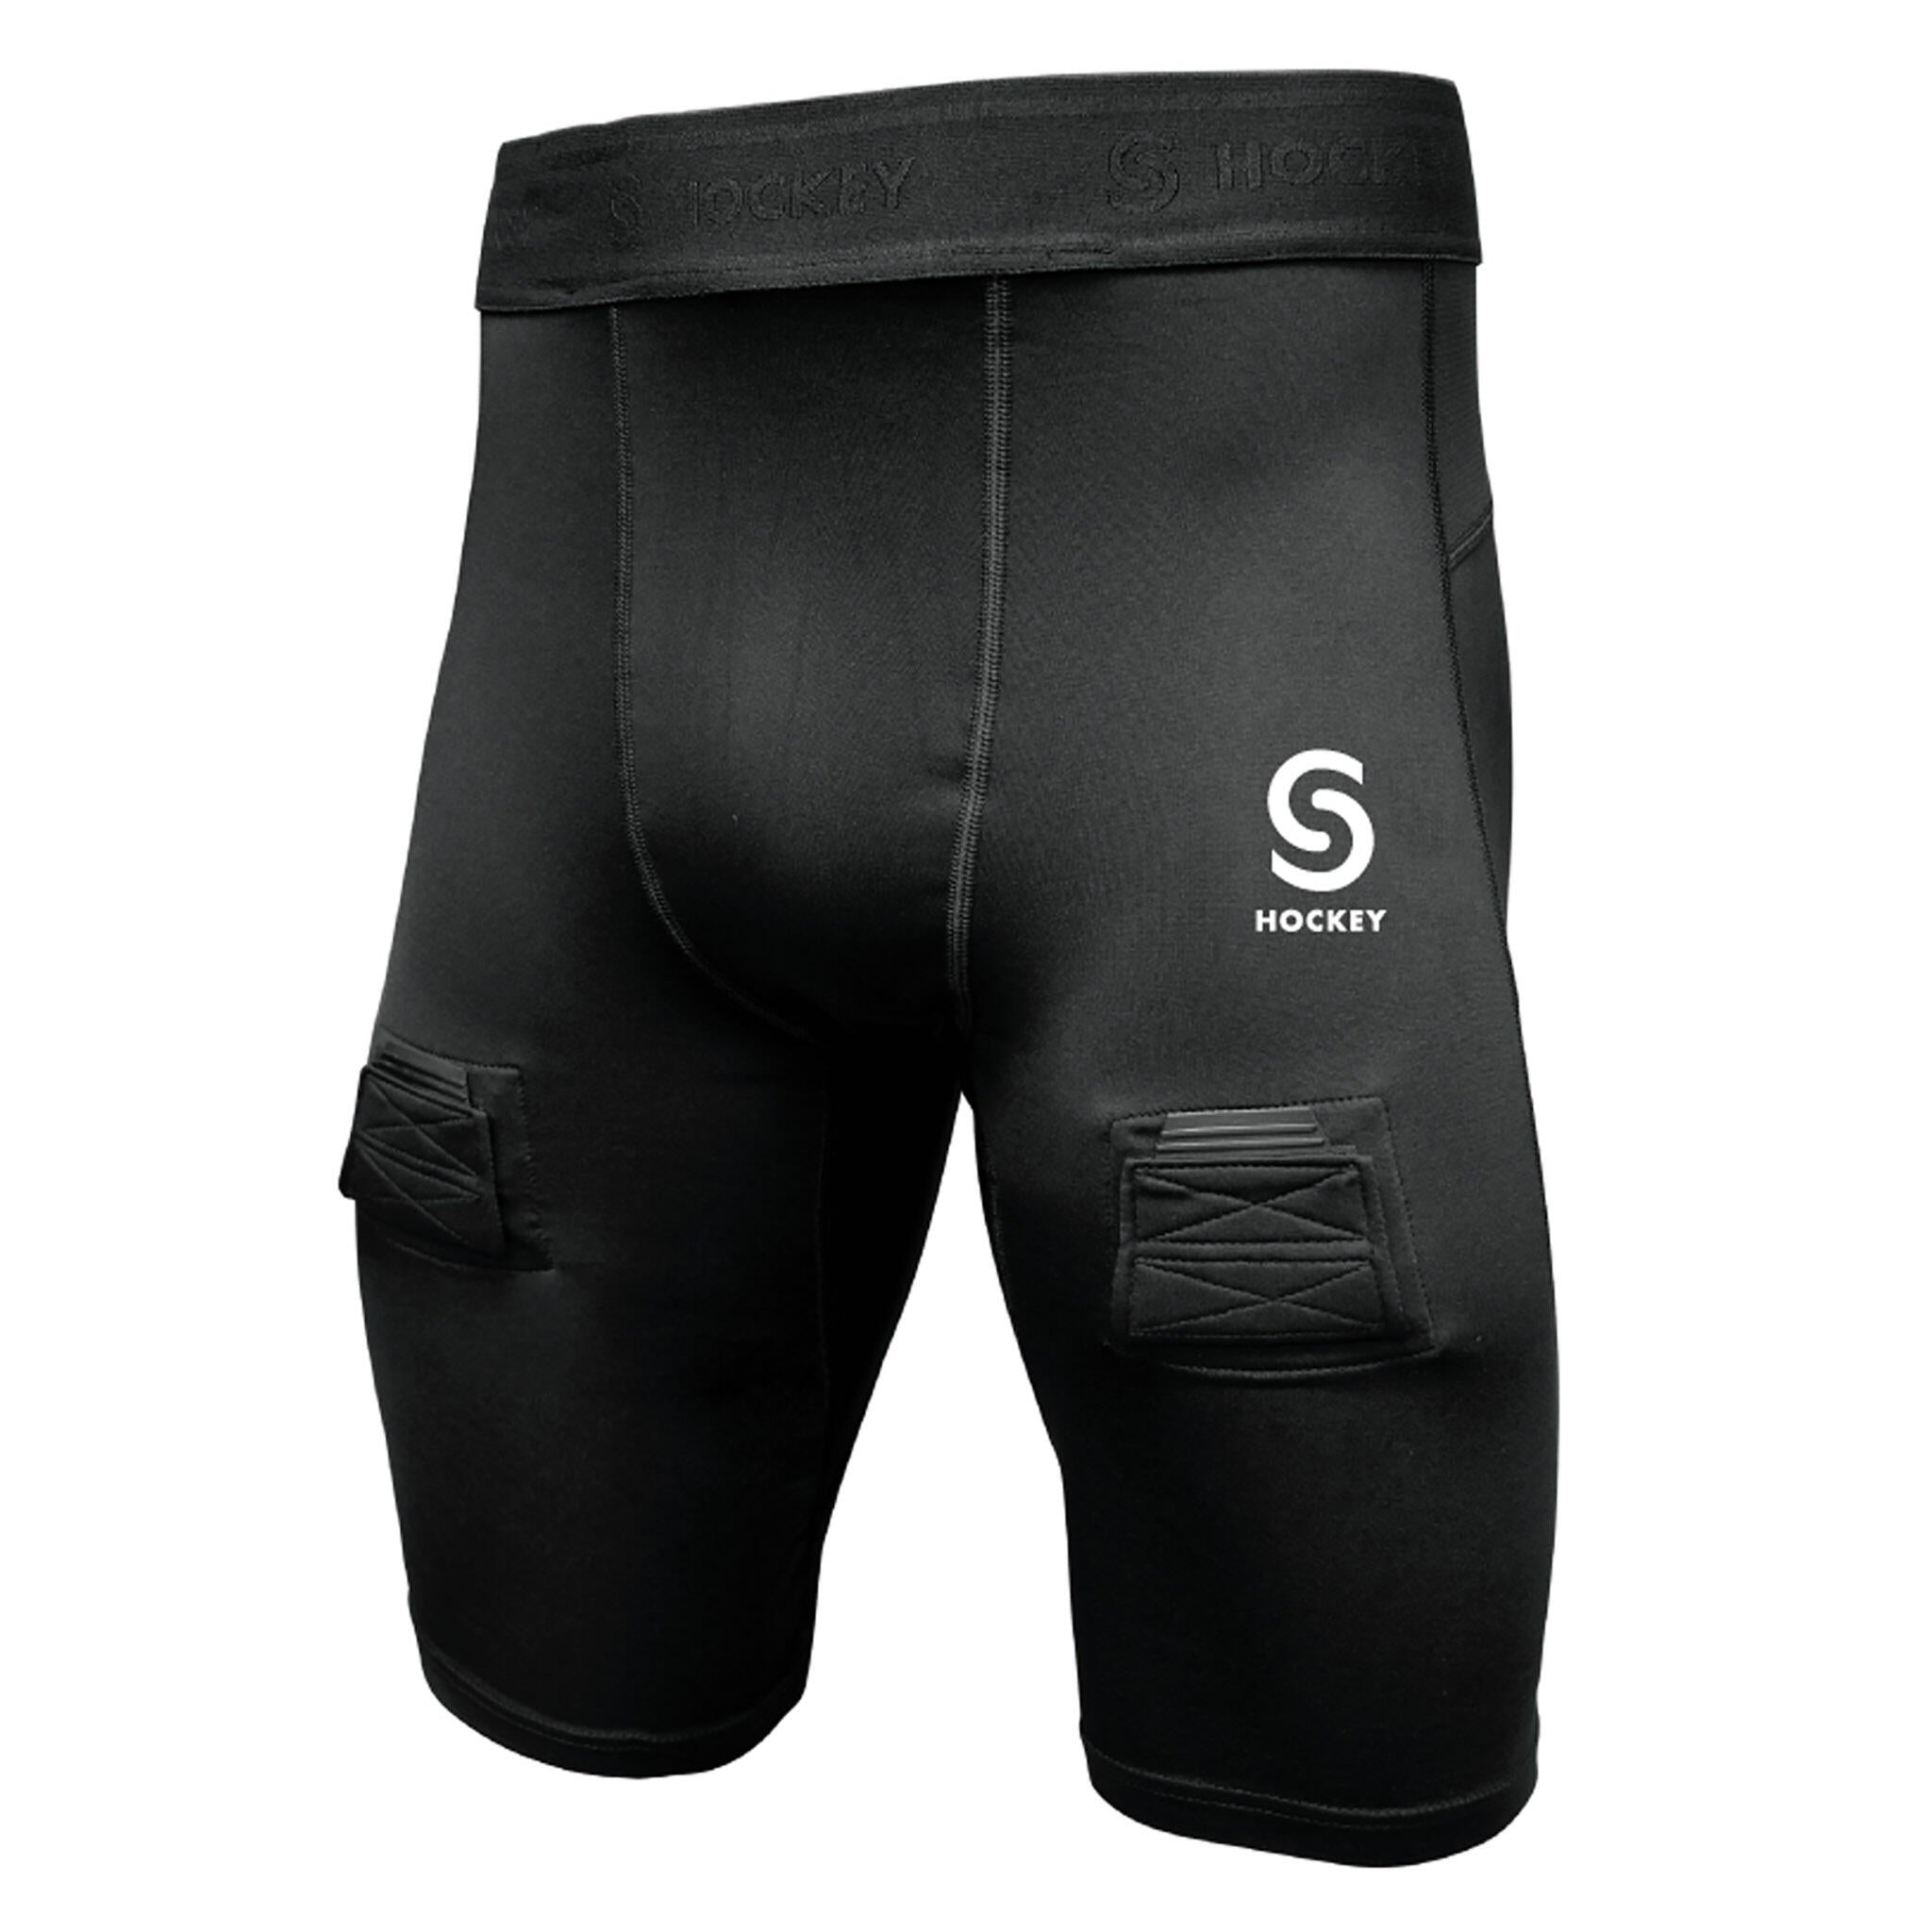 The Compression Shorts Debate & North Moore Review